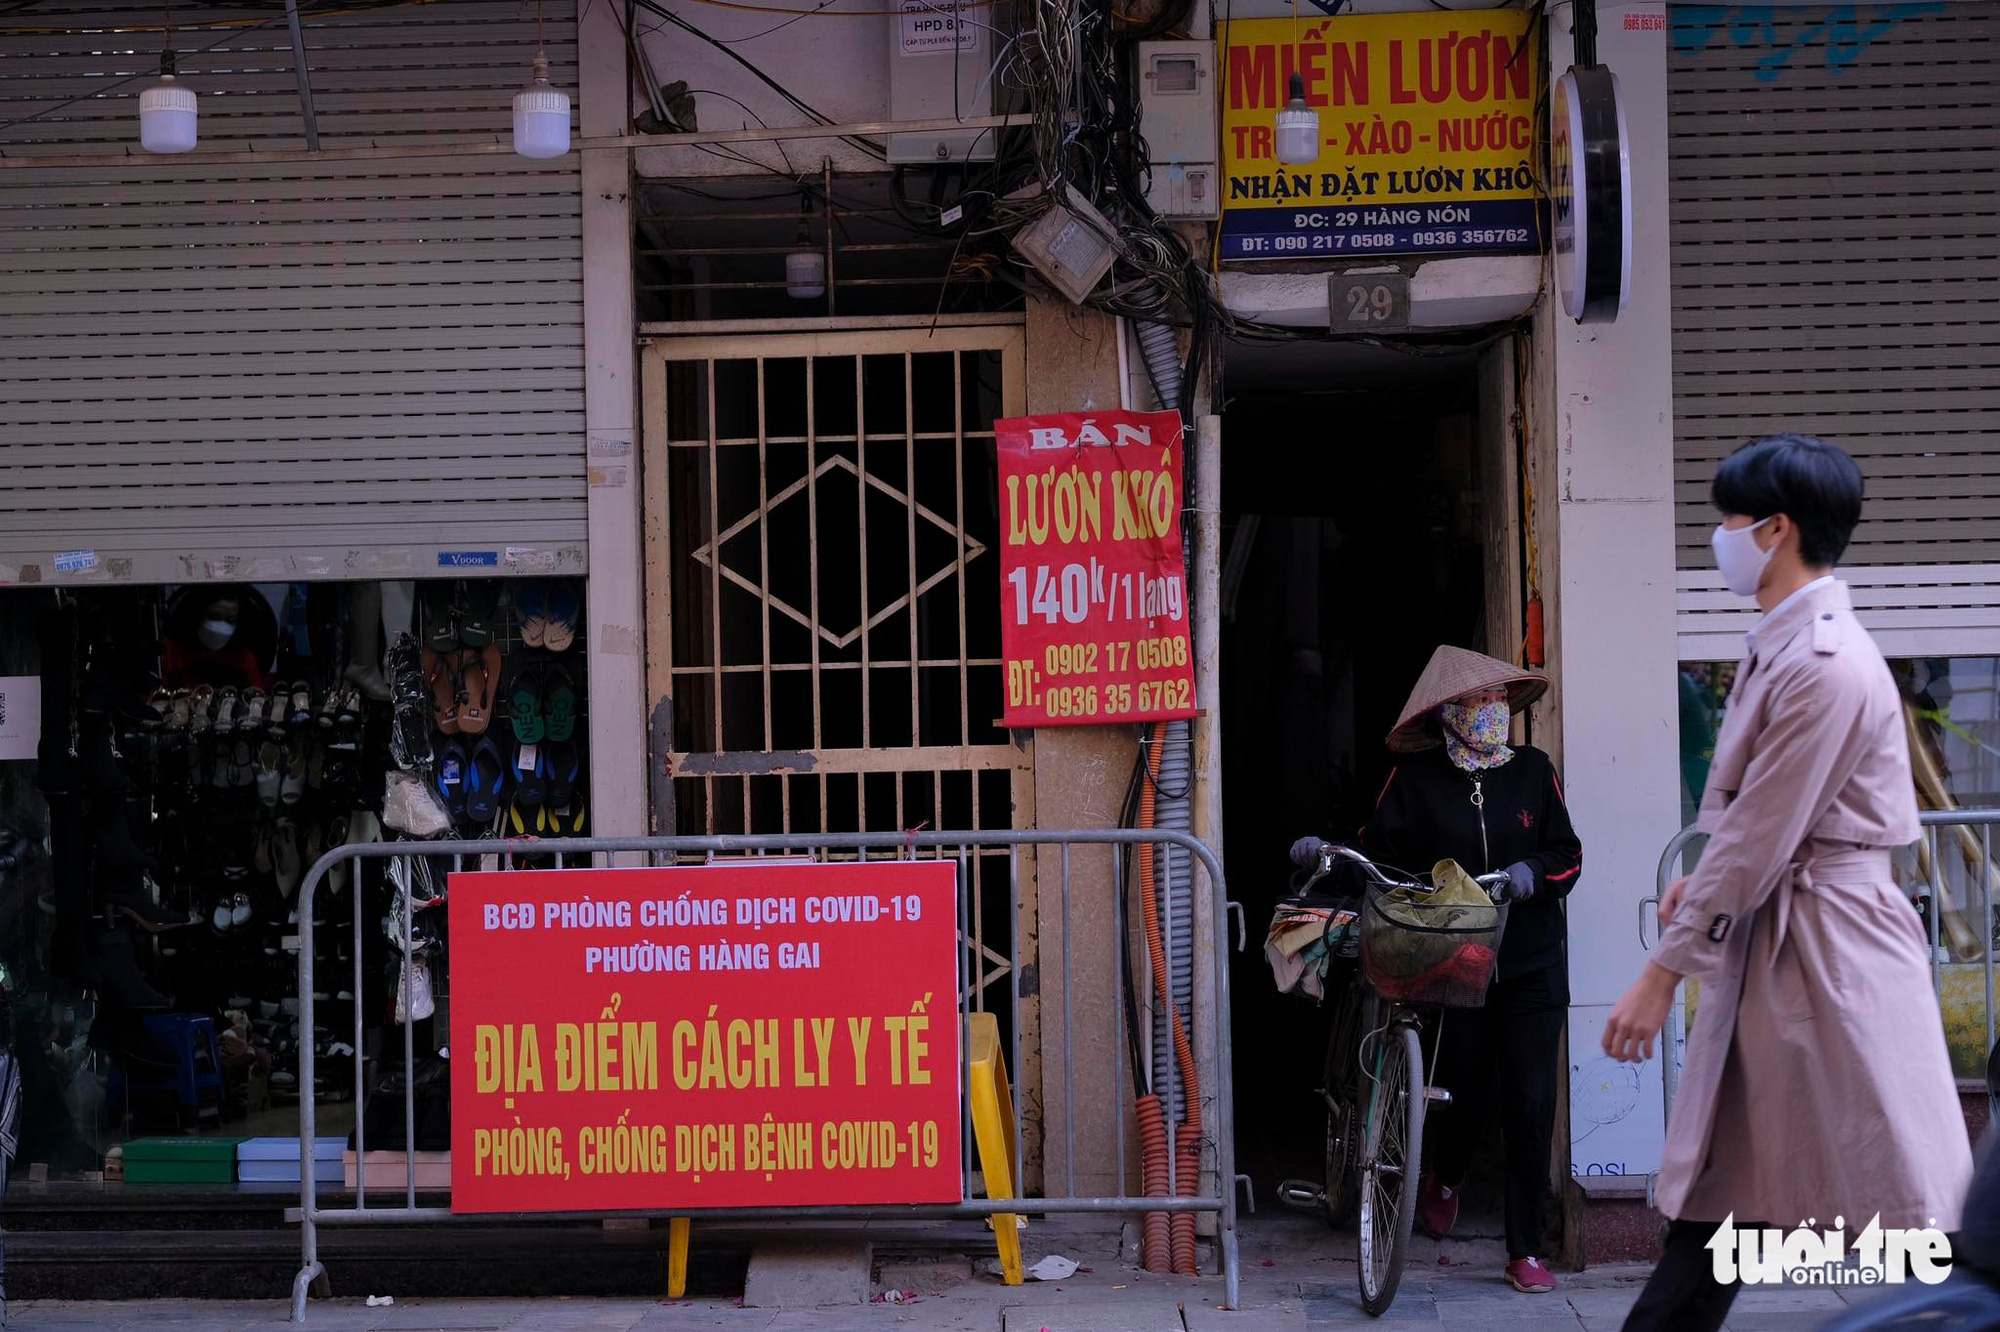 Surging COVID-19 infections put huge burden on hospitals in Hanoi